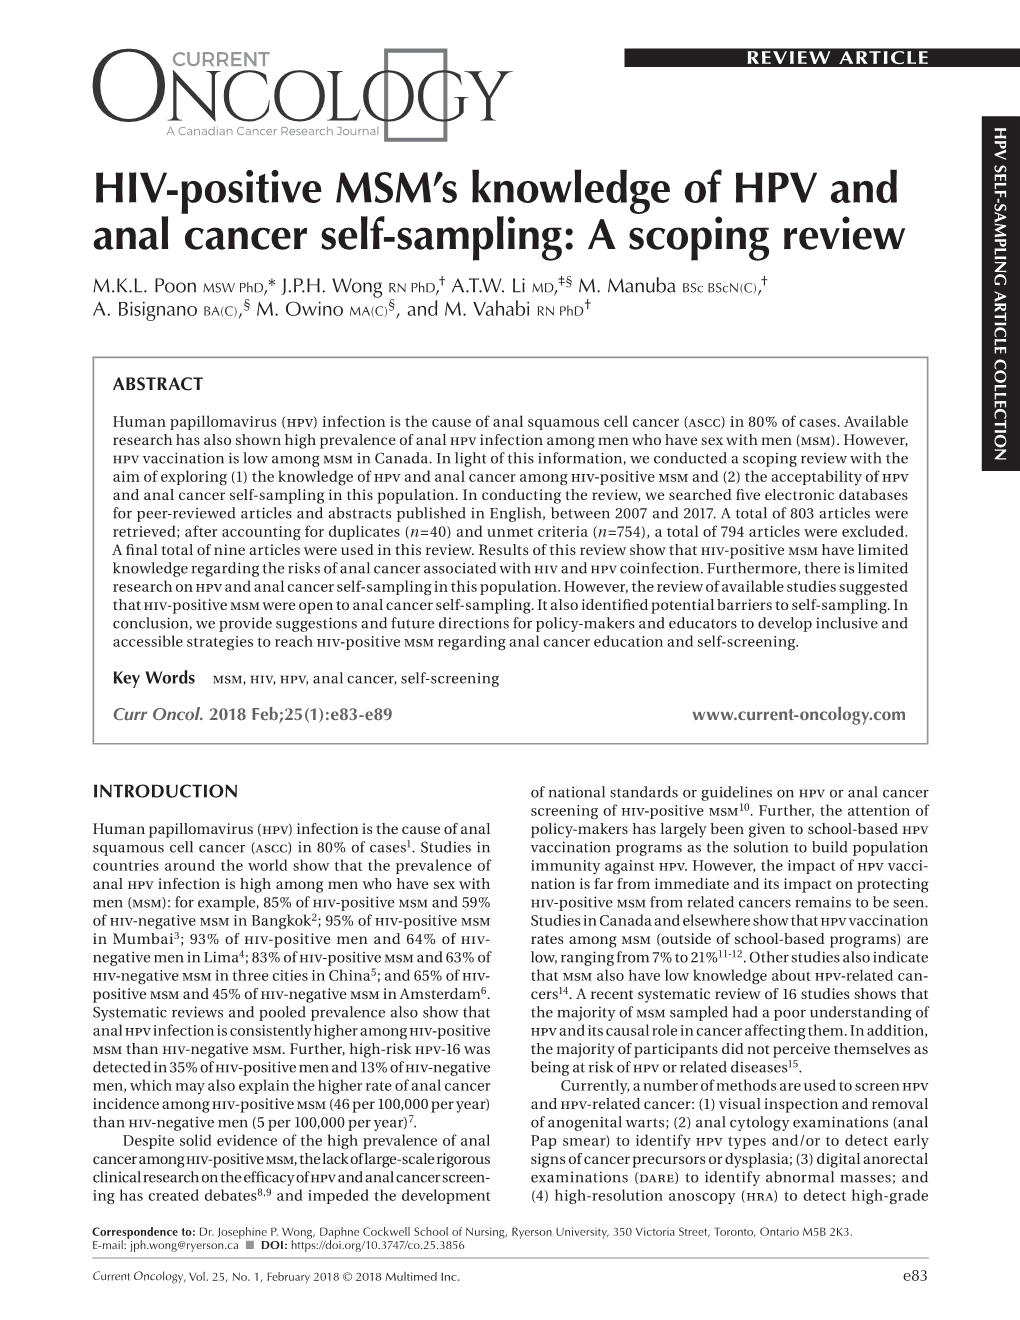 HIV-Positive MSM's Knowledge of HPV and Anal Cancer Self-Sampling